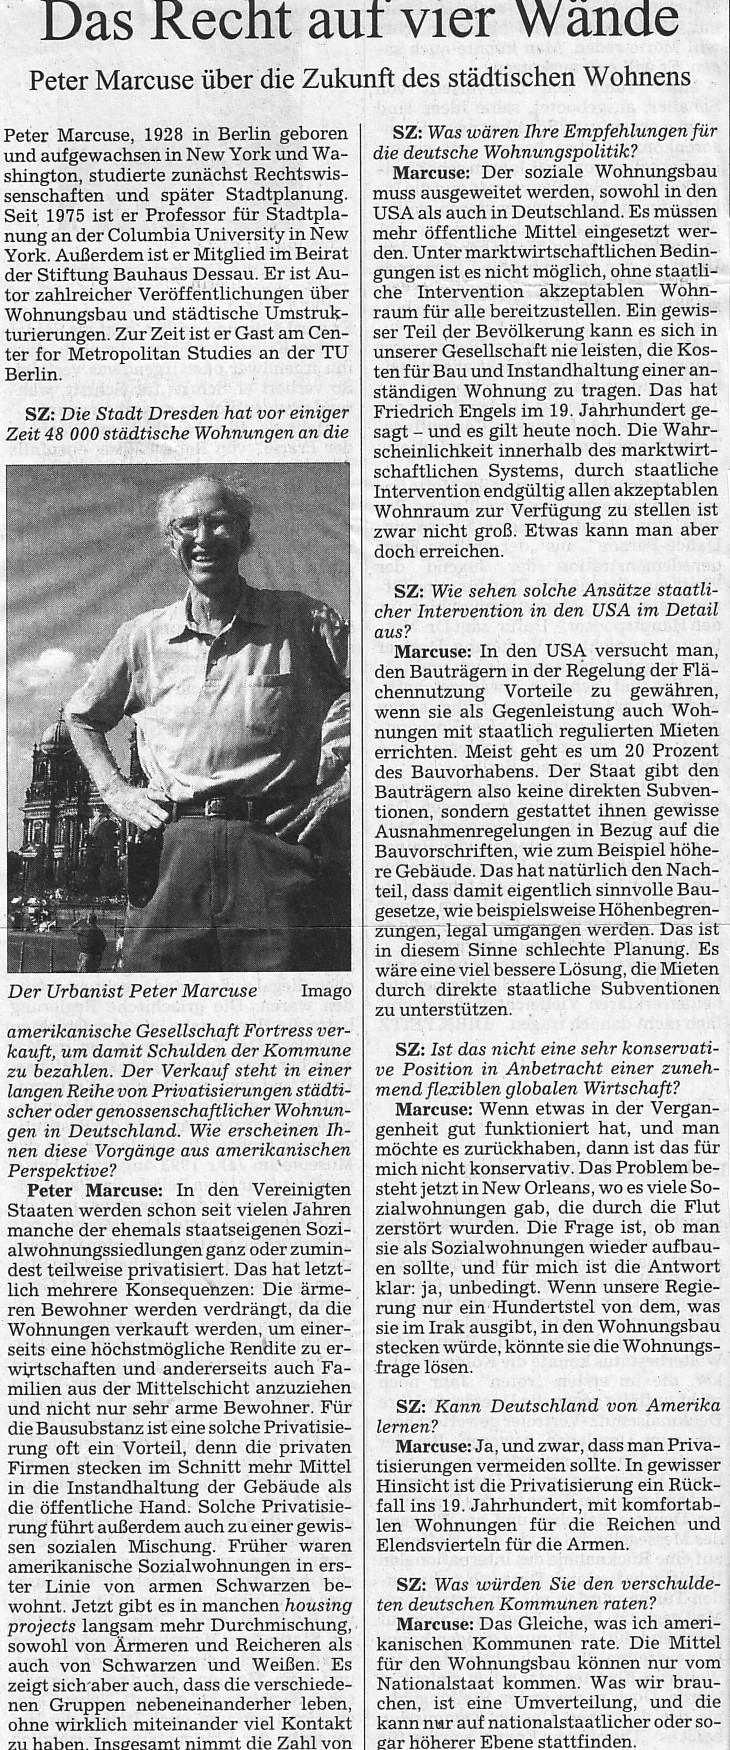 SZ interview with Peter Marcuse